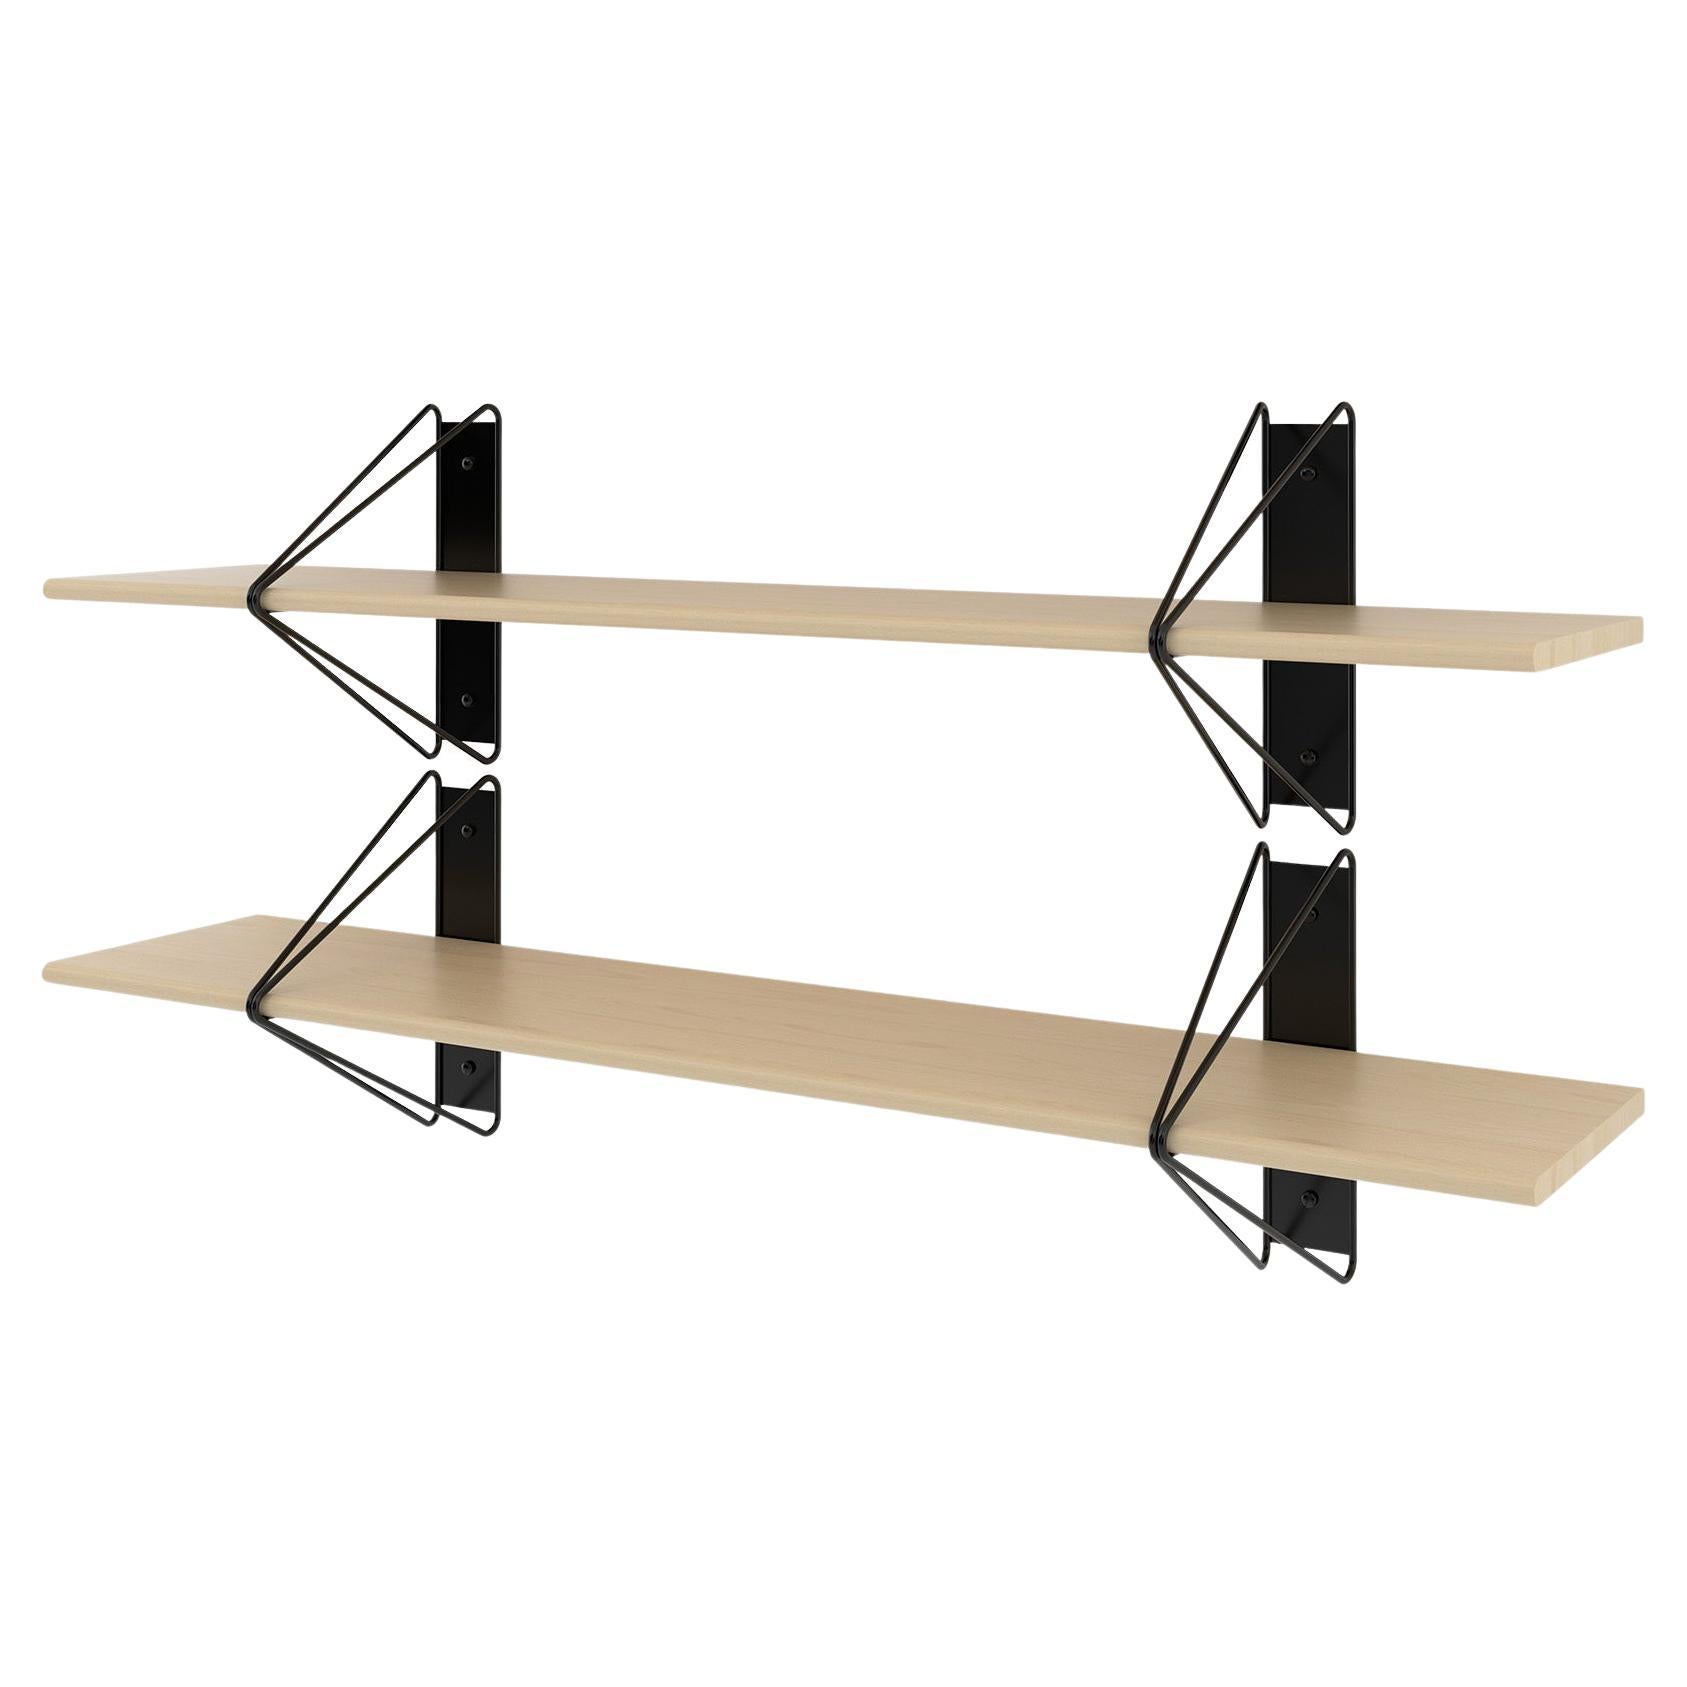 Set of 2 Strut Shelves from Souda, 52in, Black and Maple, Made to Order